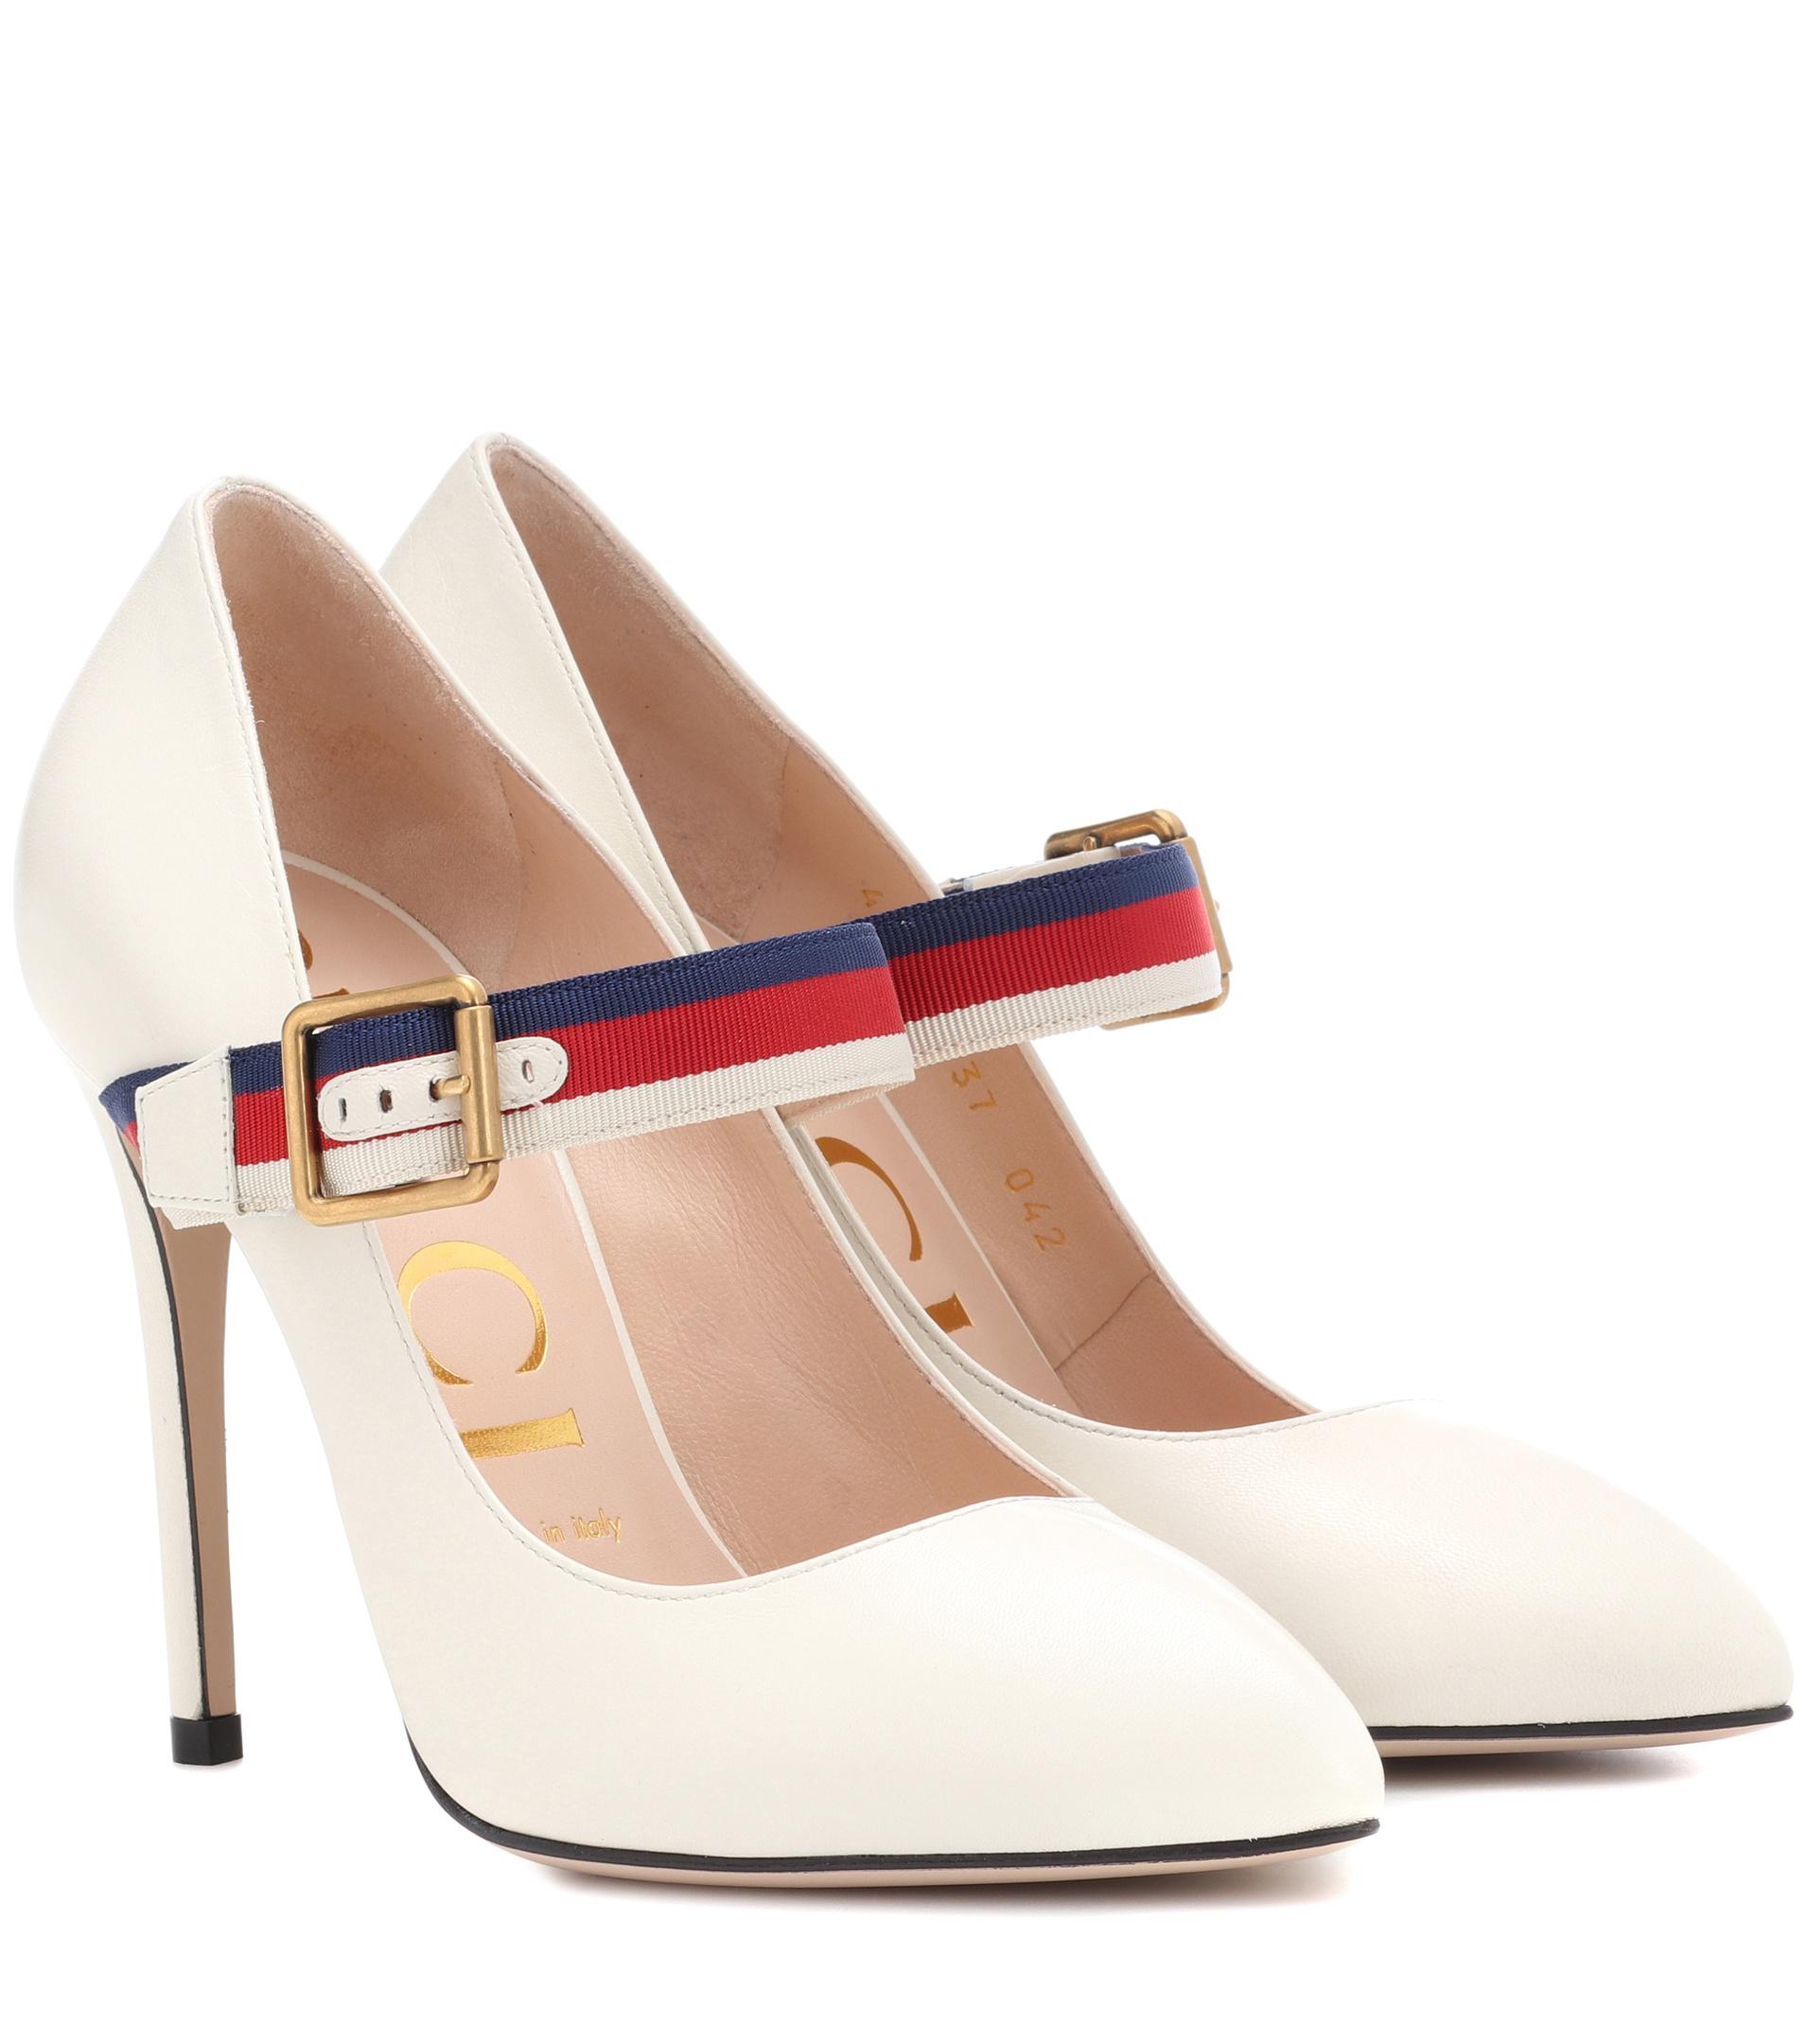 Gucci Sylvie Leather Pumps in White - Lyst